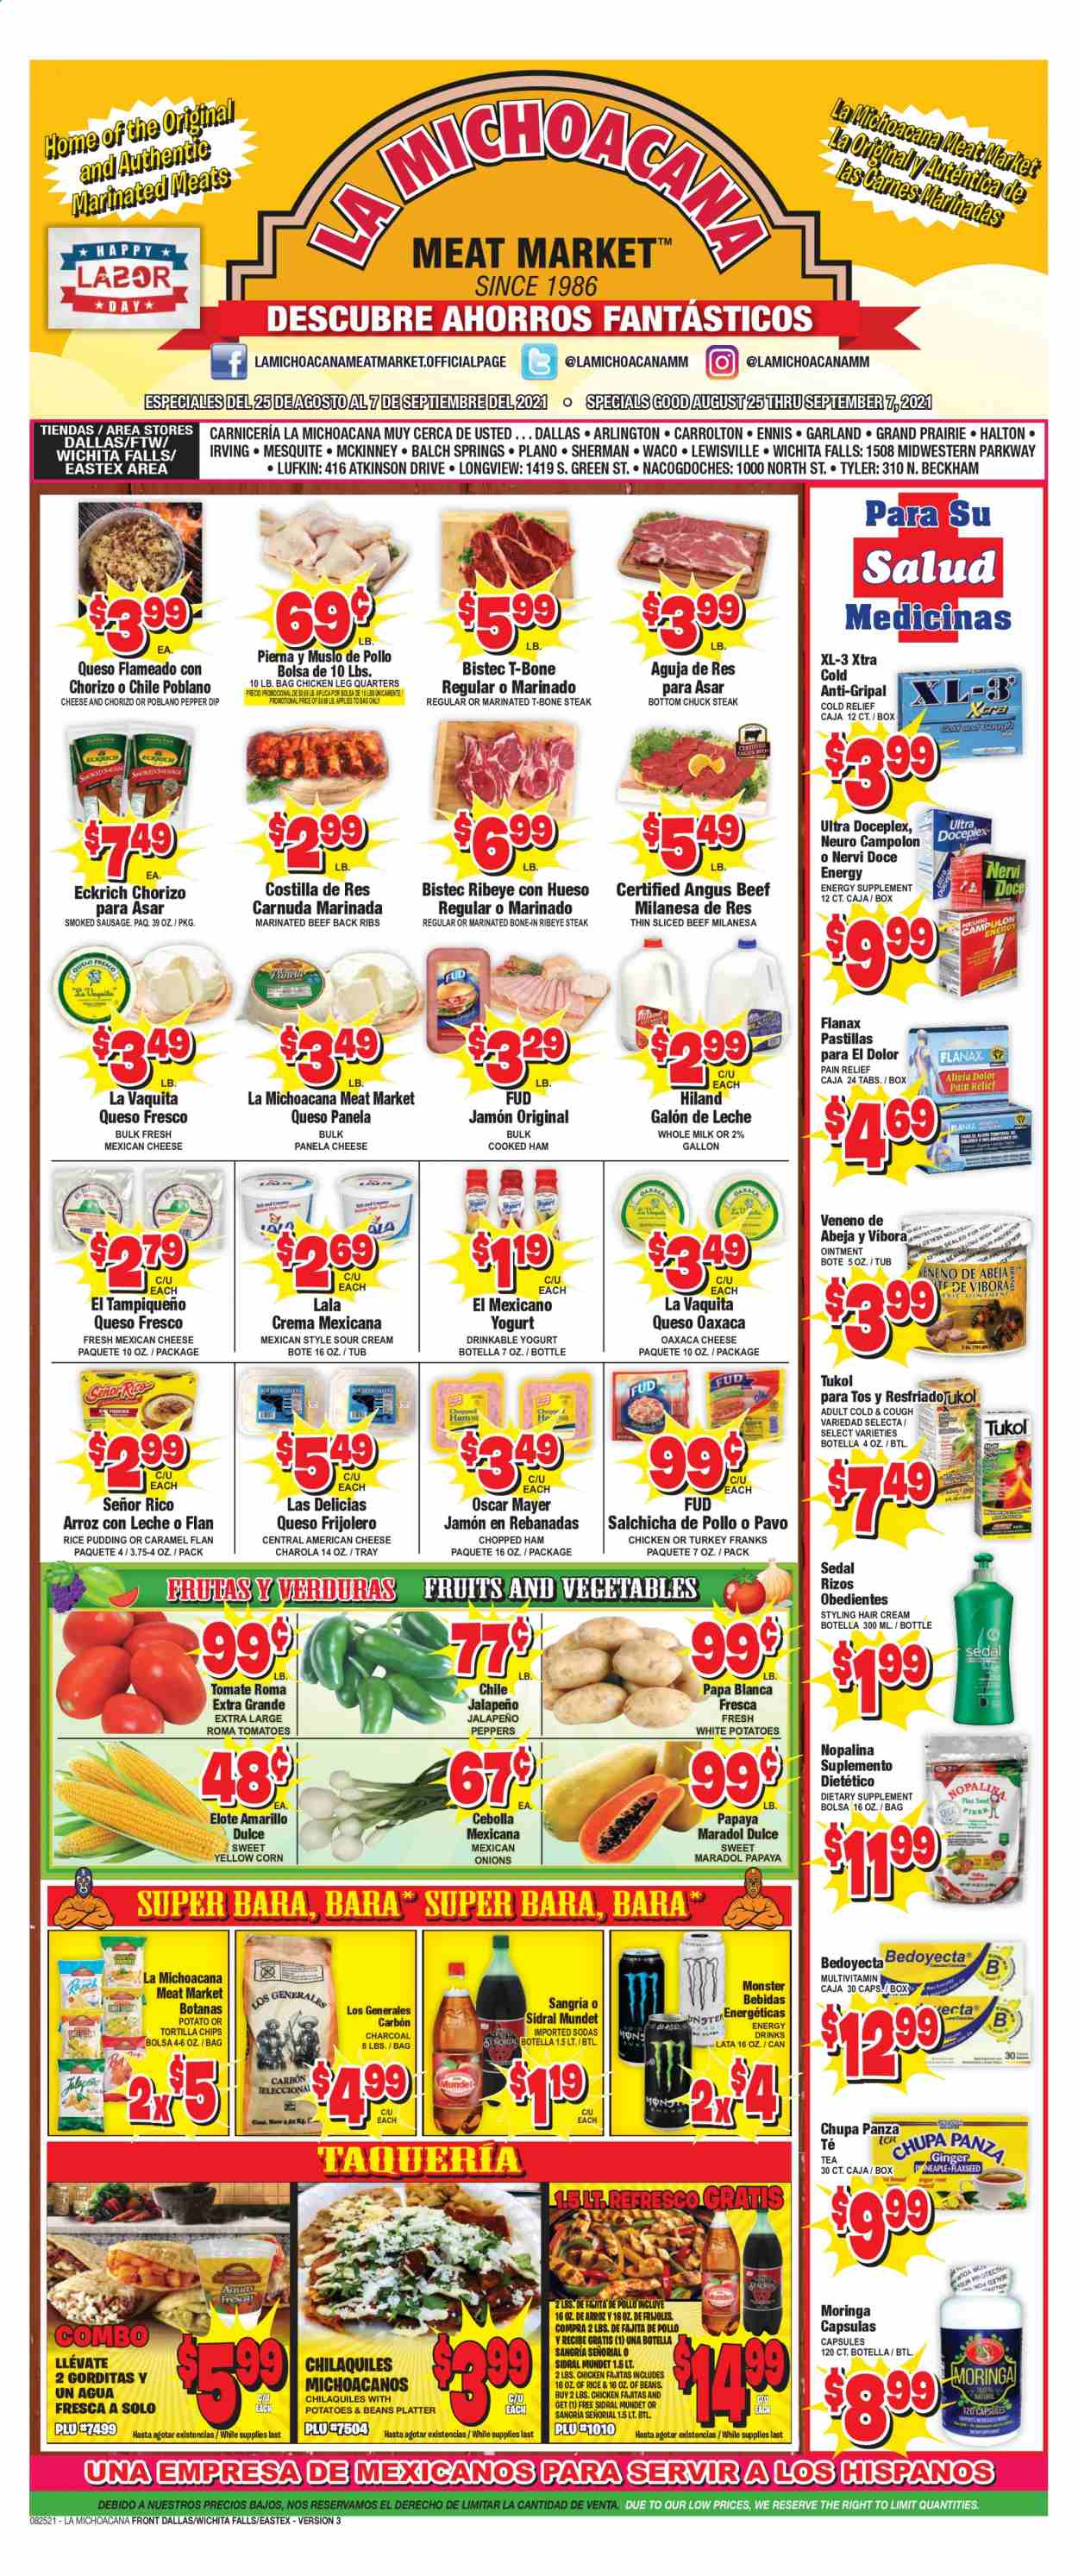 thumbnail - La Michoacana Meat Market Flyer - 08/25/2021 - 09/07/2021 - Sales products - beans, corn, tomatoes, jalapeño, papaya, fajita, cooked ham, ham, chorizo, Oscar Mayer, sausage, smoked sausage, american cheese, queso fresco, cheese, Panela cheese, yoghurt, rice pudding, milk, sour cream, dip, tortilla chips, chips, energy drink, Monster, tea, chicken legs, beef meat, beef steak, t-bone steak, steak, bone-in ribeye, chuck steak, ribeye steak, marinated beef, ointment, XTRA, hair cream. Page 1.